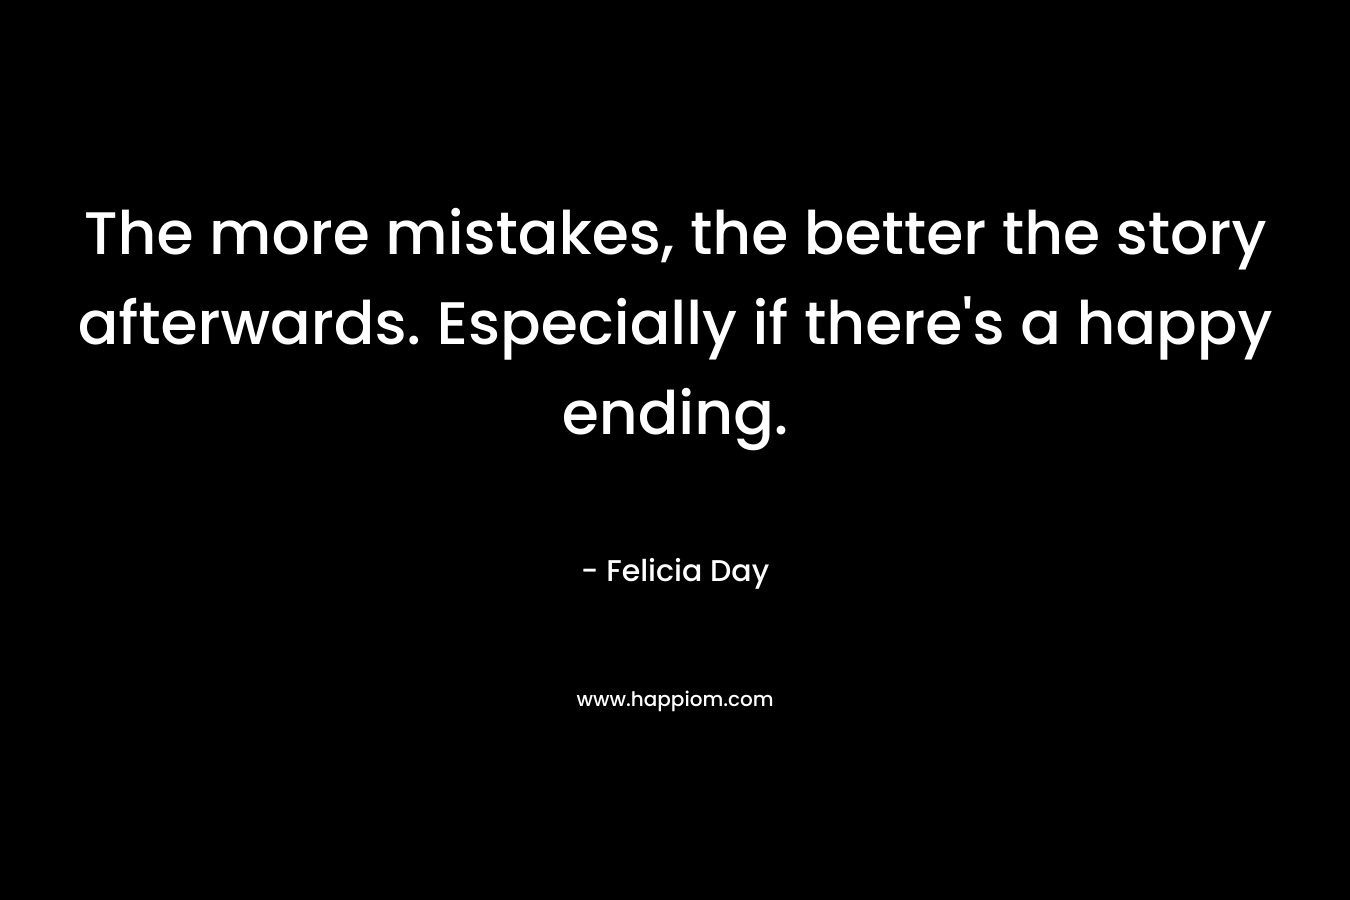 The more mistakes, the better the story afterwards. Especially if there's a happy ending.